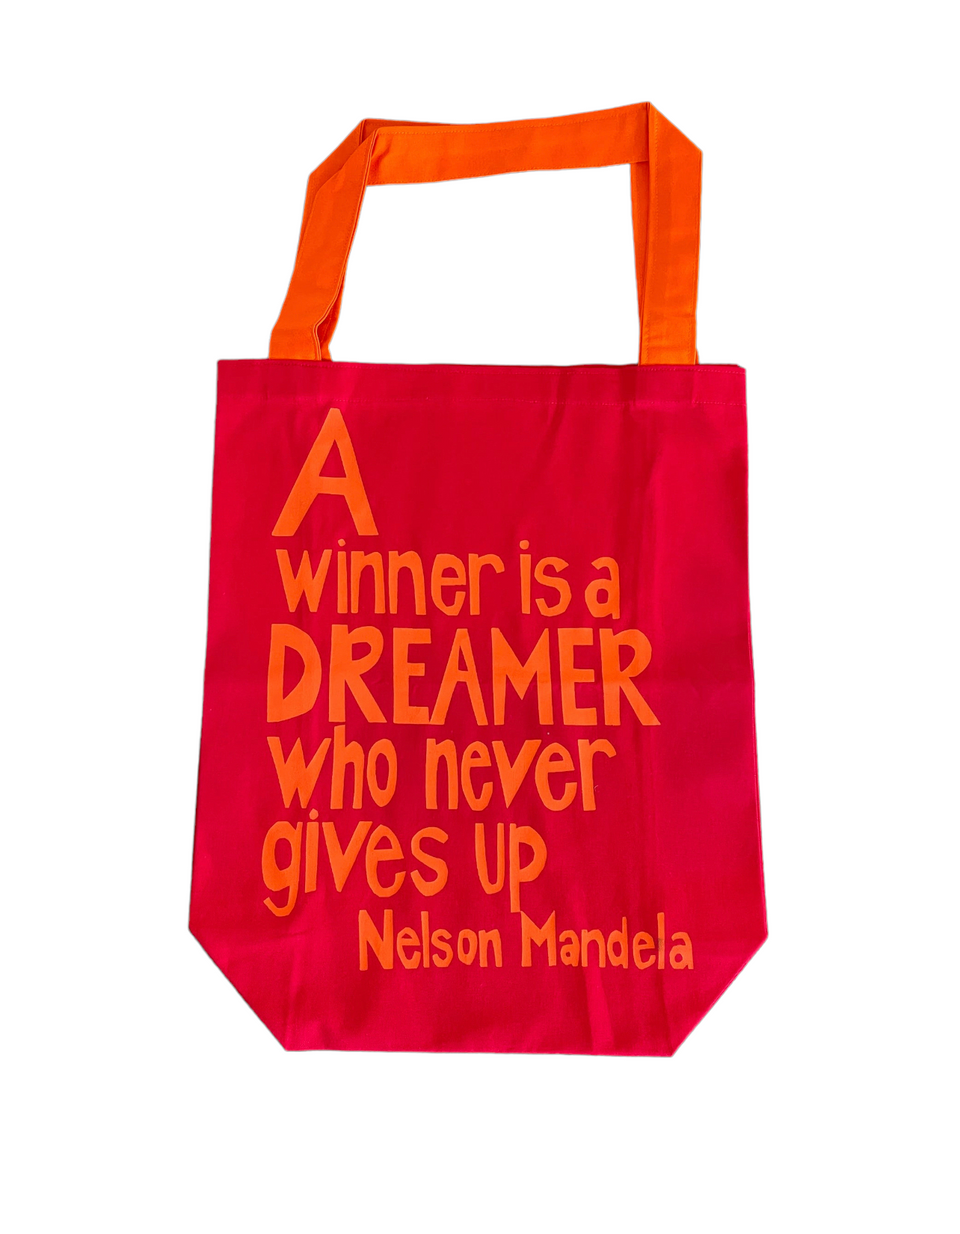 "A Winner Is A Dreamer Who Never Gives Up" Nelson Mandela Tote